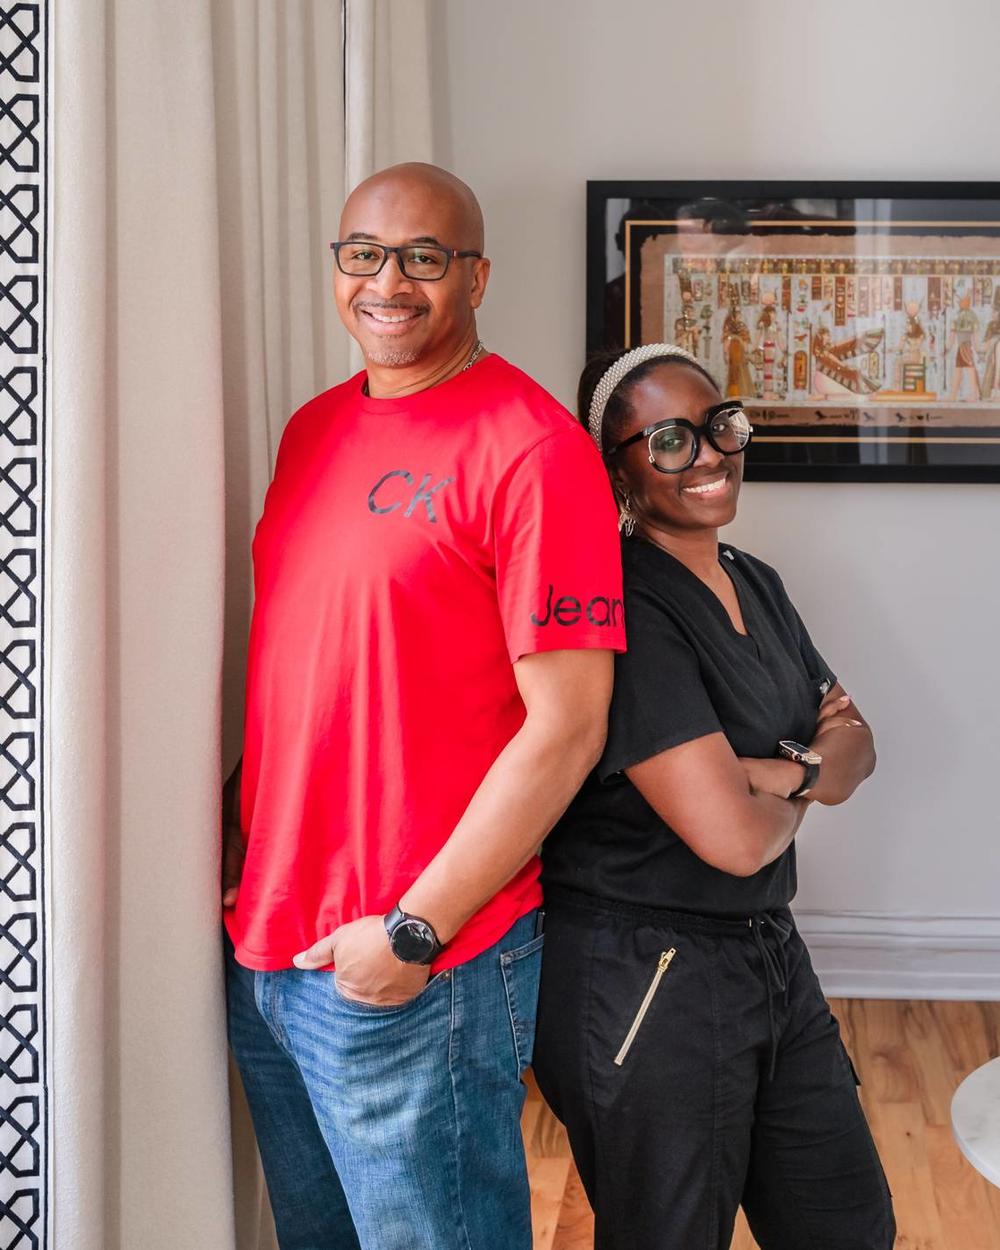 Deon Aiken, left, and Dr. Anissa Jones worked with NewTown Macon to rehabilitate a vacant building on Cherry Street that now houses their loft and Dr. Jones’ chiropractic firm.